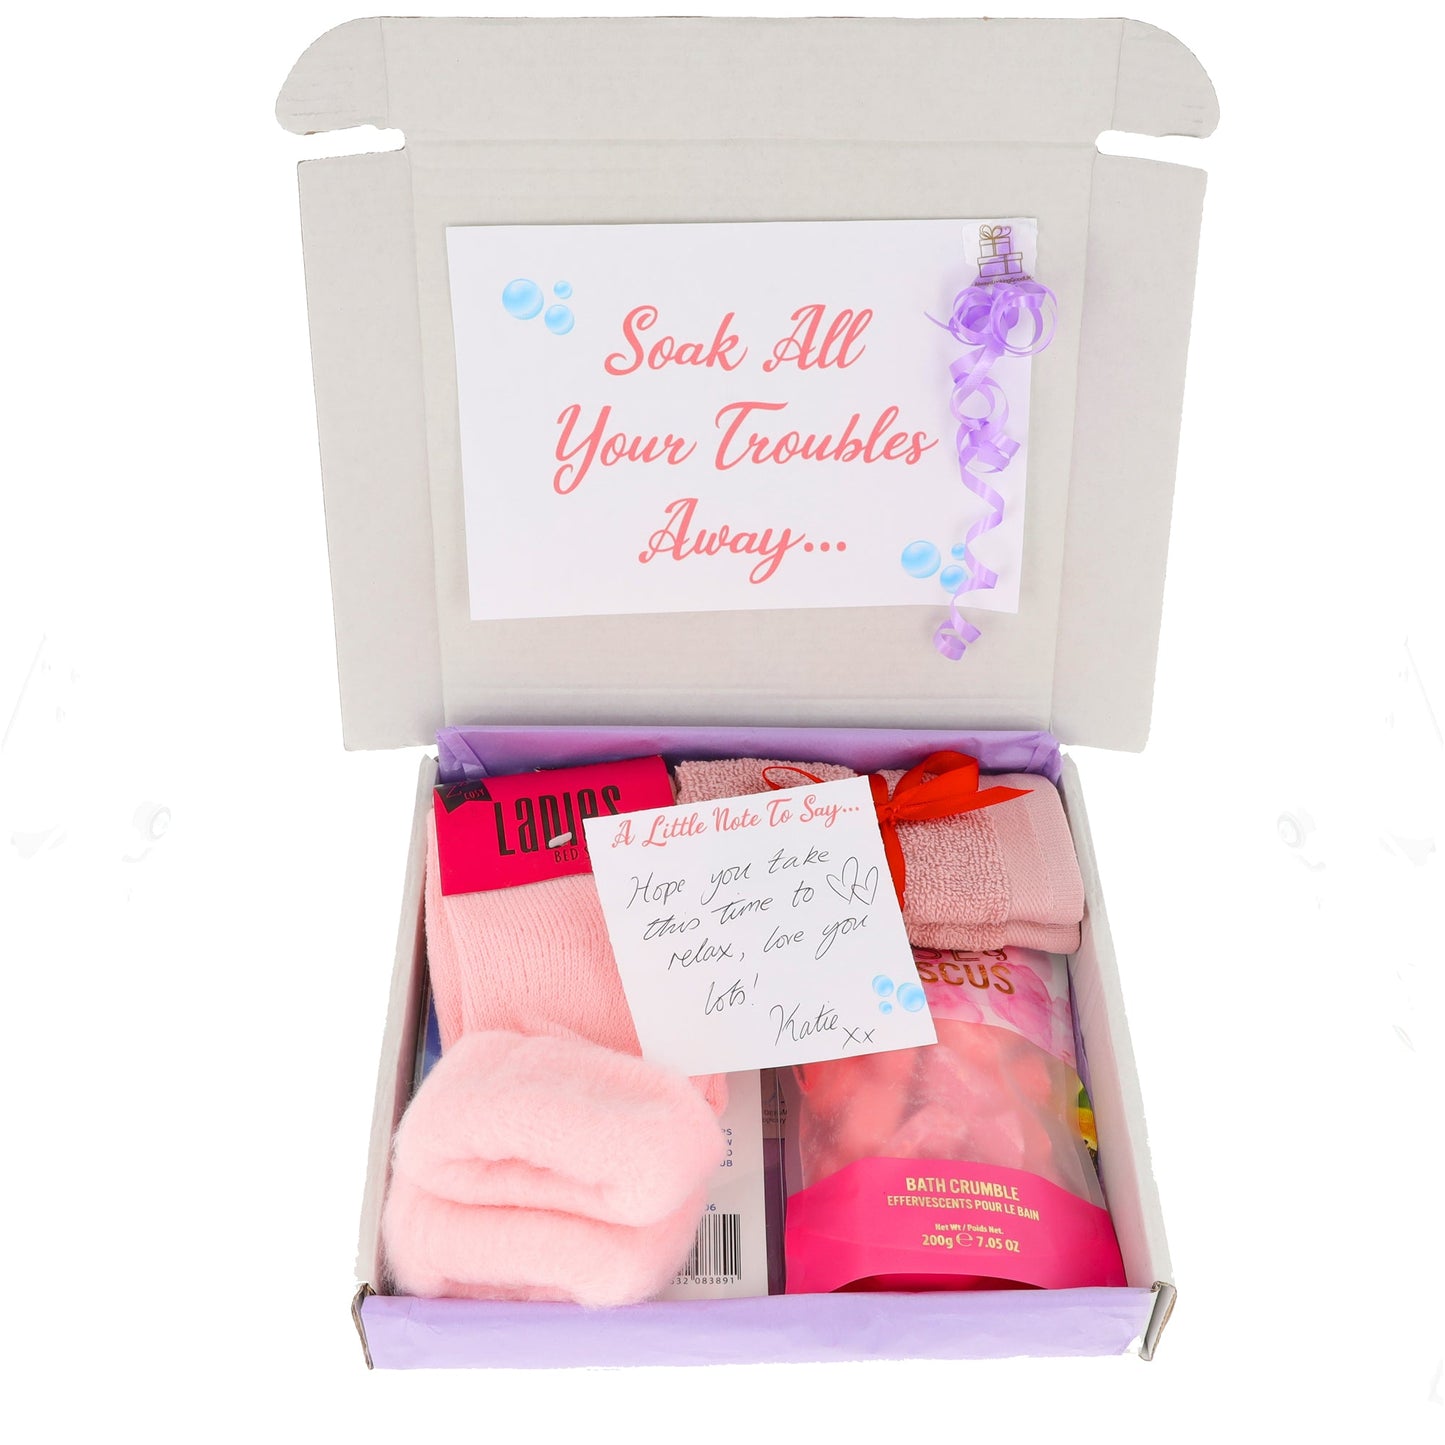 Mother's Day Bath Time Pamper Hamper Gift Box  - Always Looking Good -   